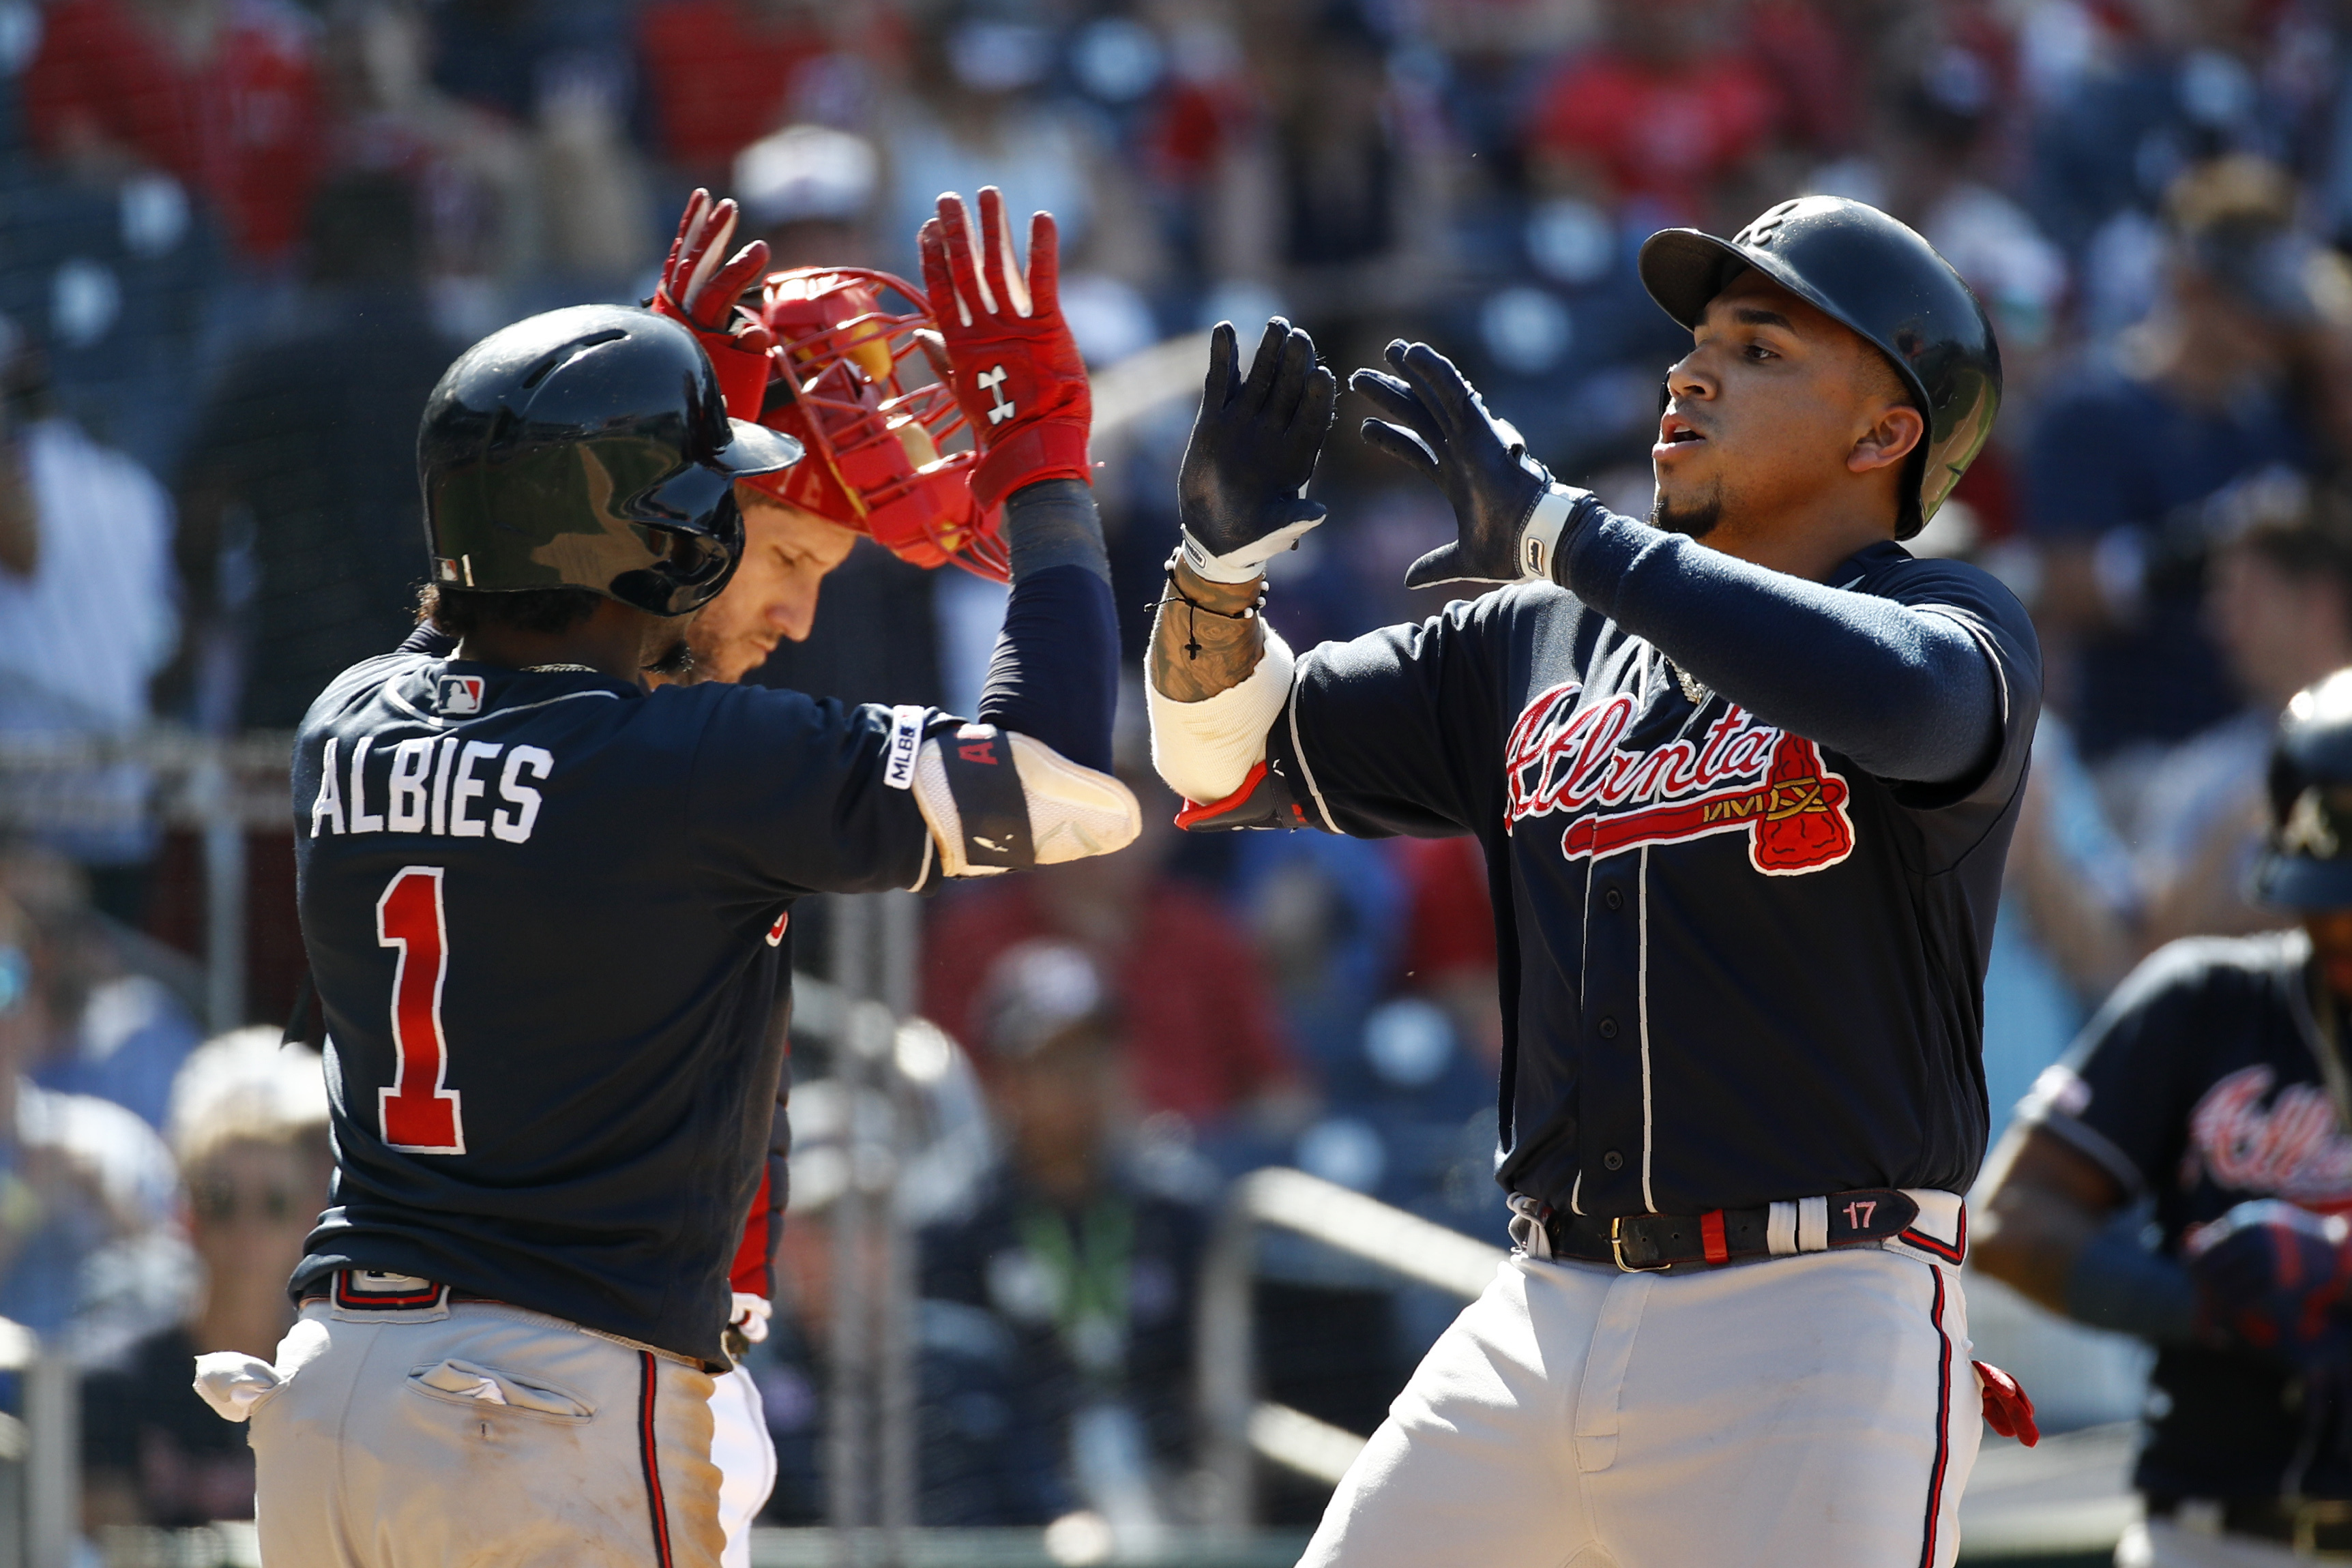 Camargo's pinch-hit HR in 10th lifts Braves past Nats 4-3